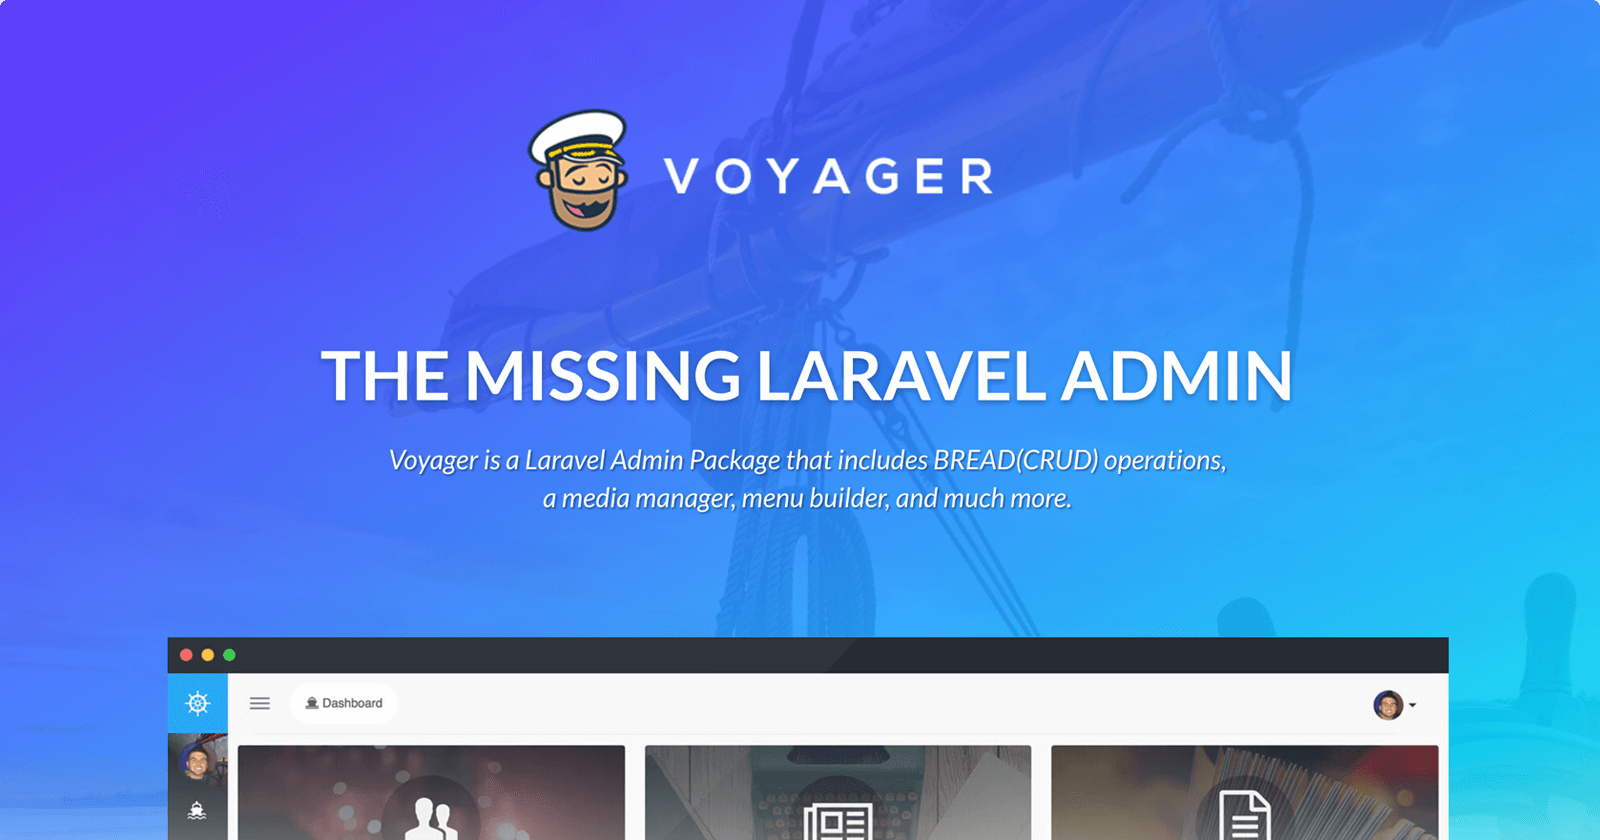 How to create new role in voyager with dashboard access